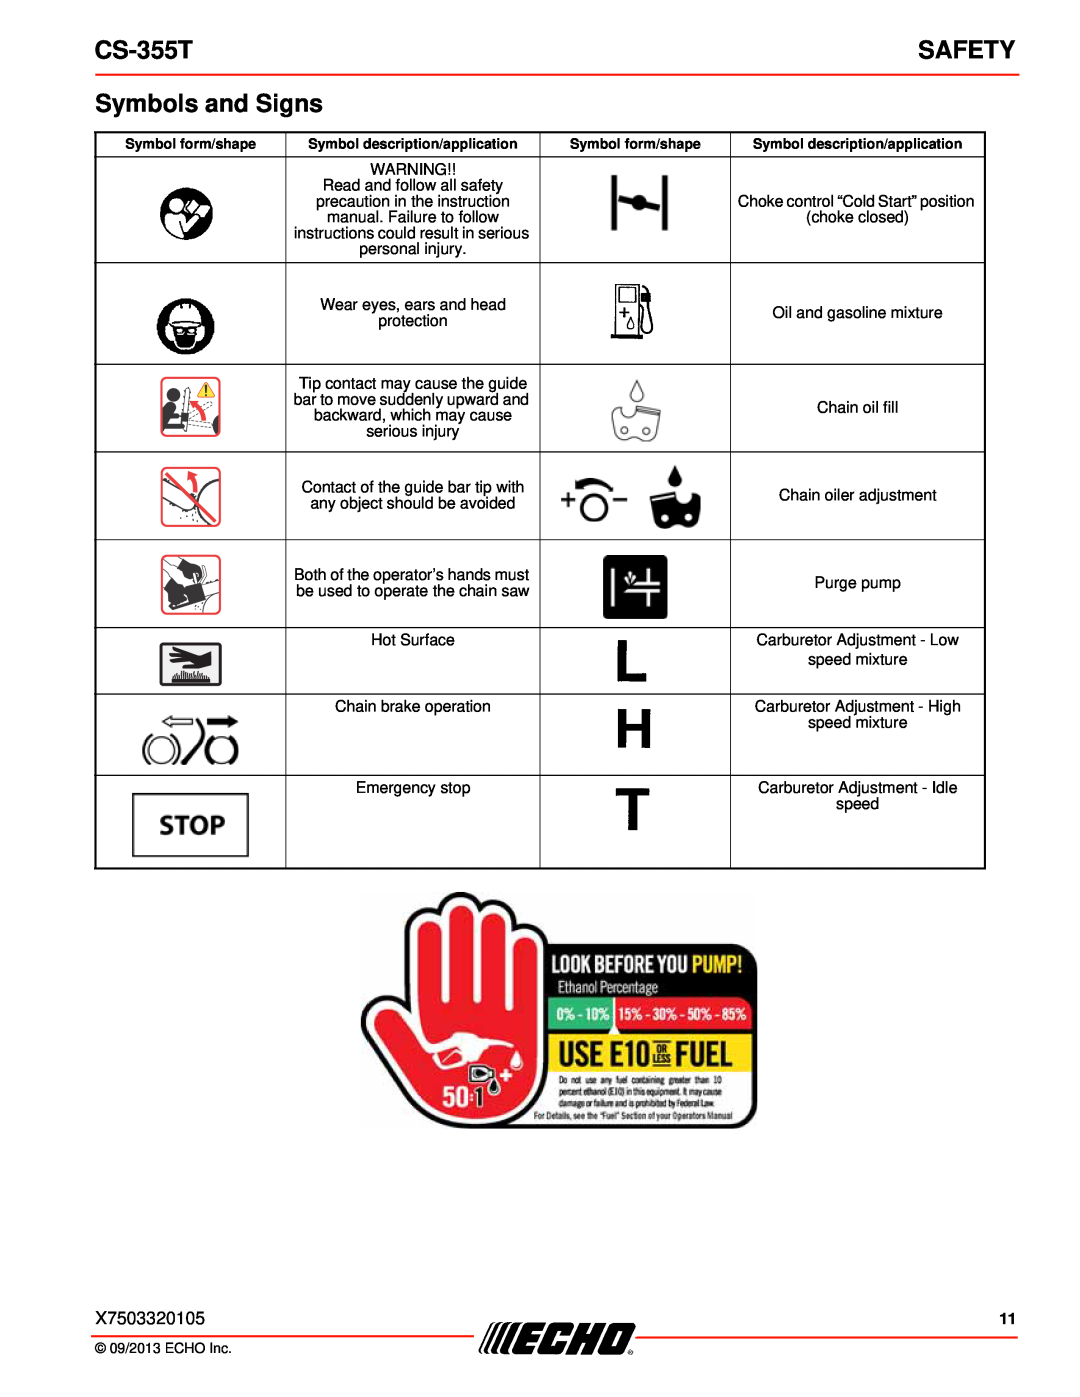 Echo CS-355T instruction manual Symbols and Signs, Safety, Hot Surface, Symbol form/shape 